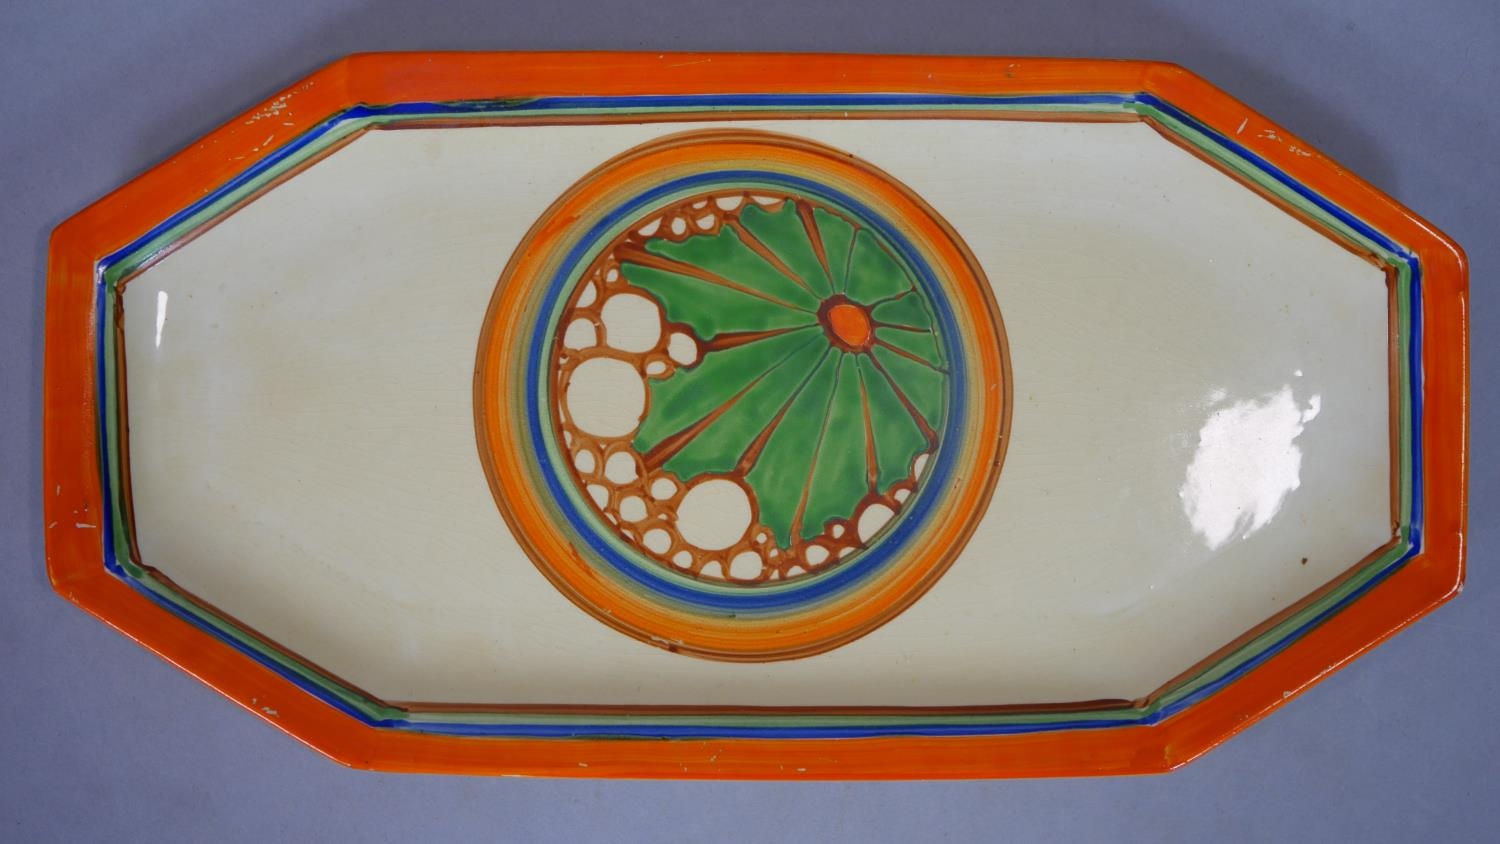 Clarice Cliff, Broth pattern A shape 334 sandwich tray, hand painted with a central roundel of green